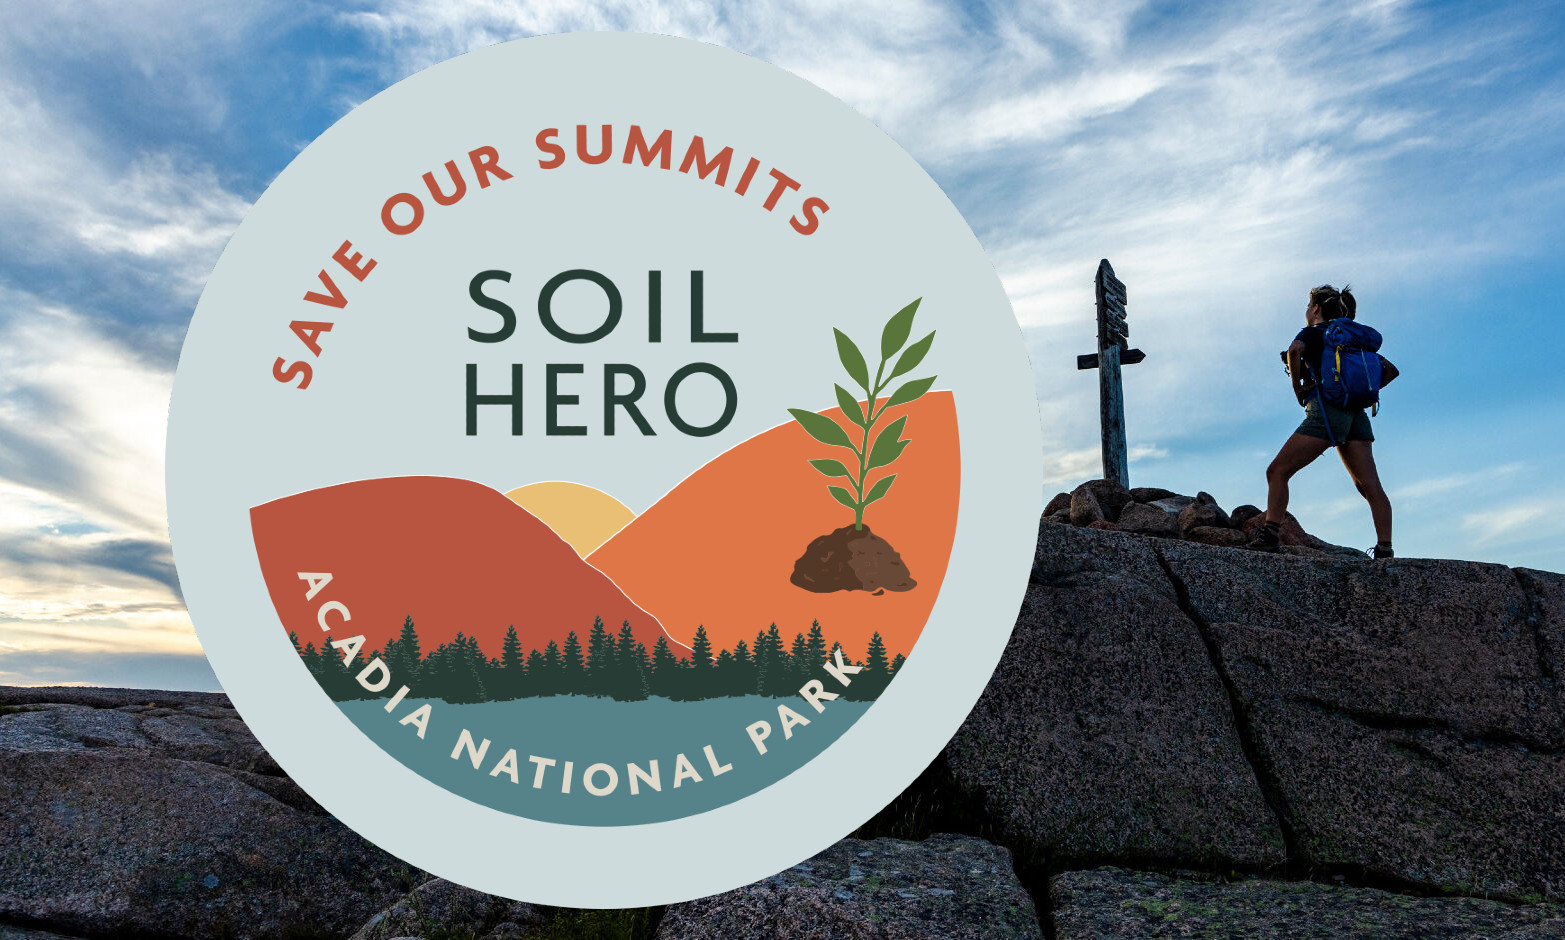 Save Our Summits Registration is Open!